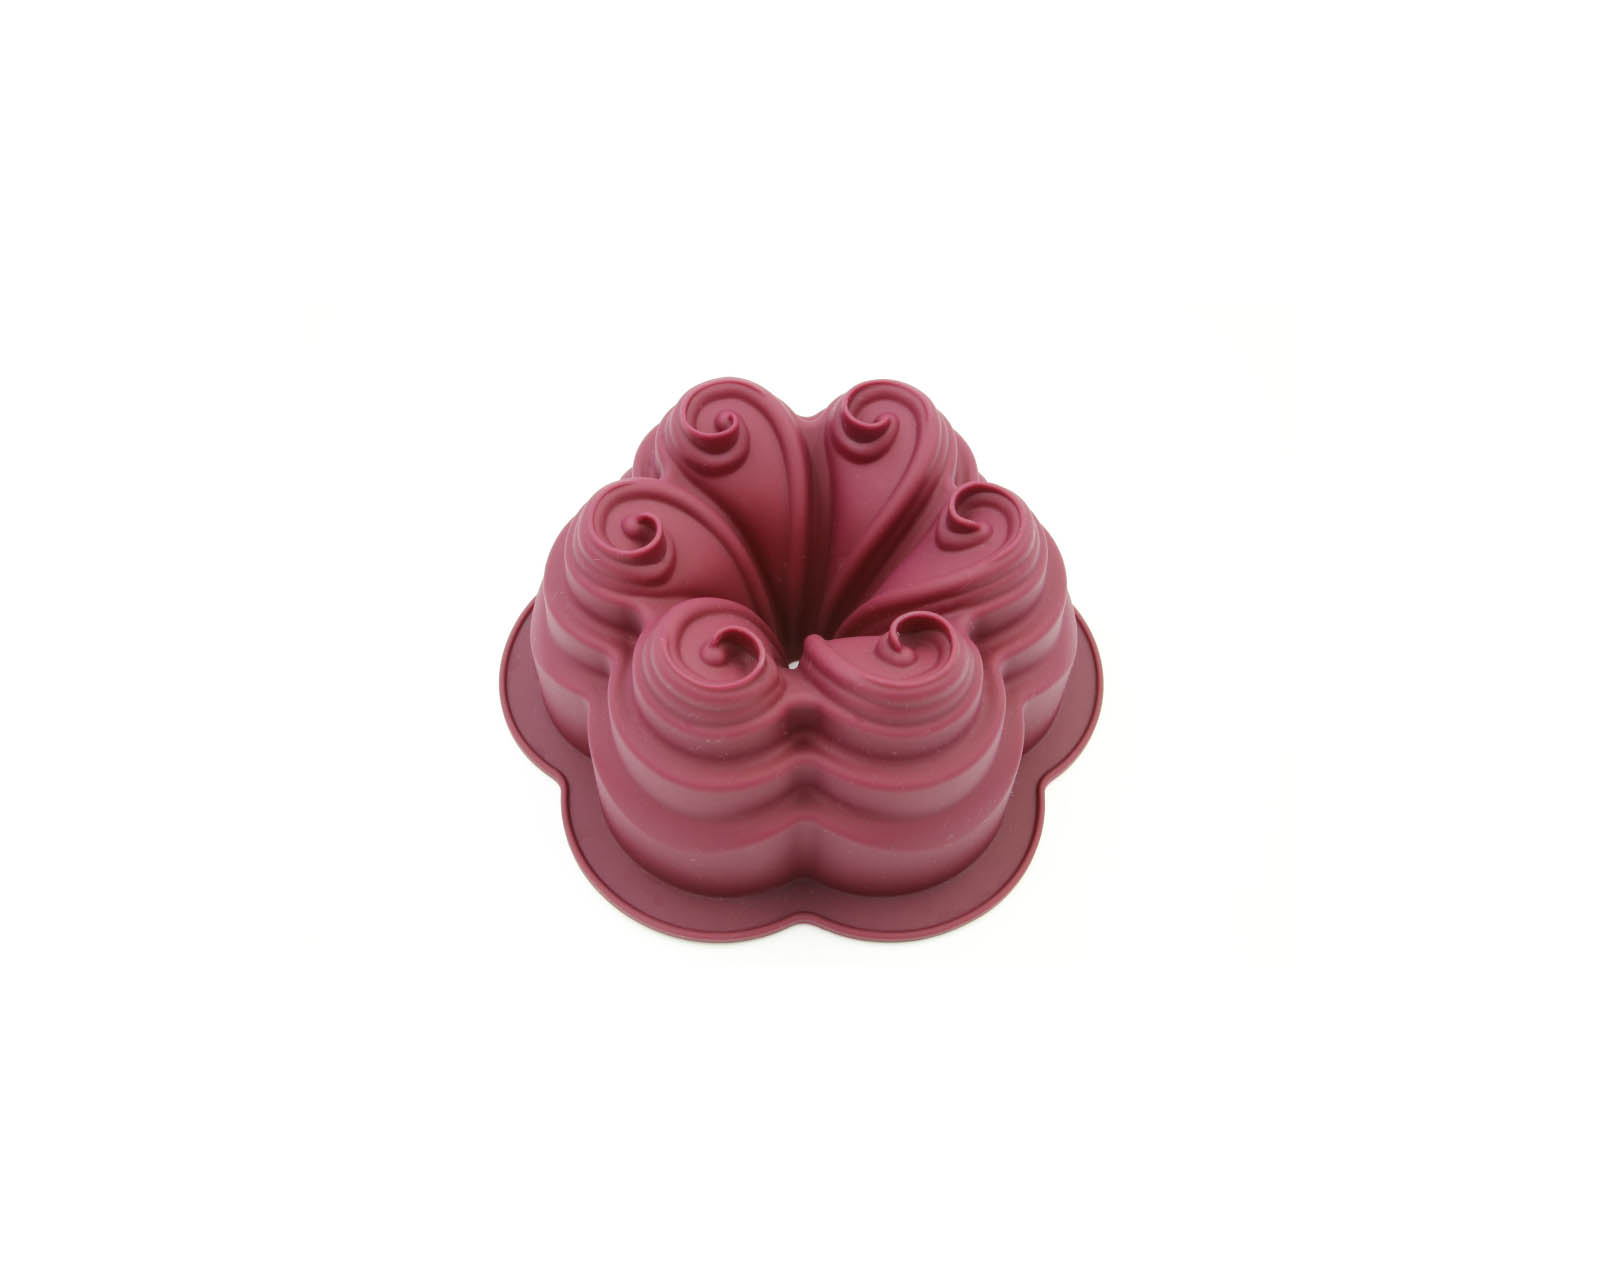 BM066 Flower Cake Mould | silicone cake mould in oven